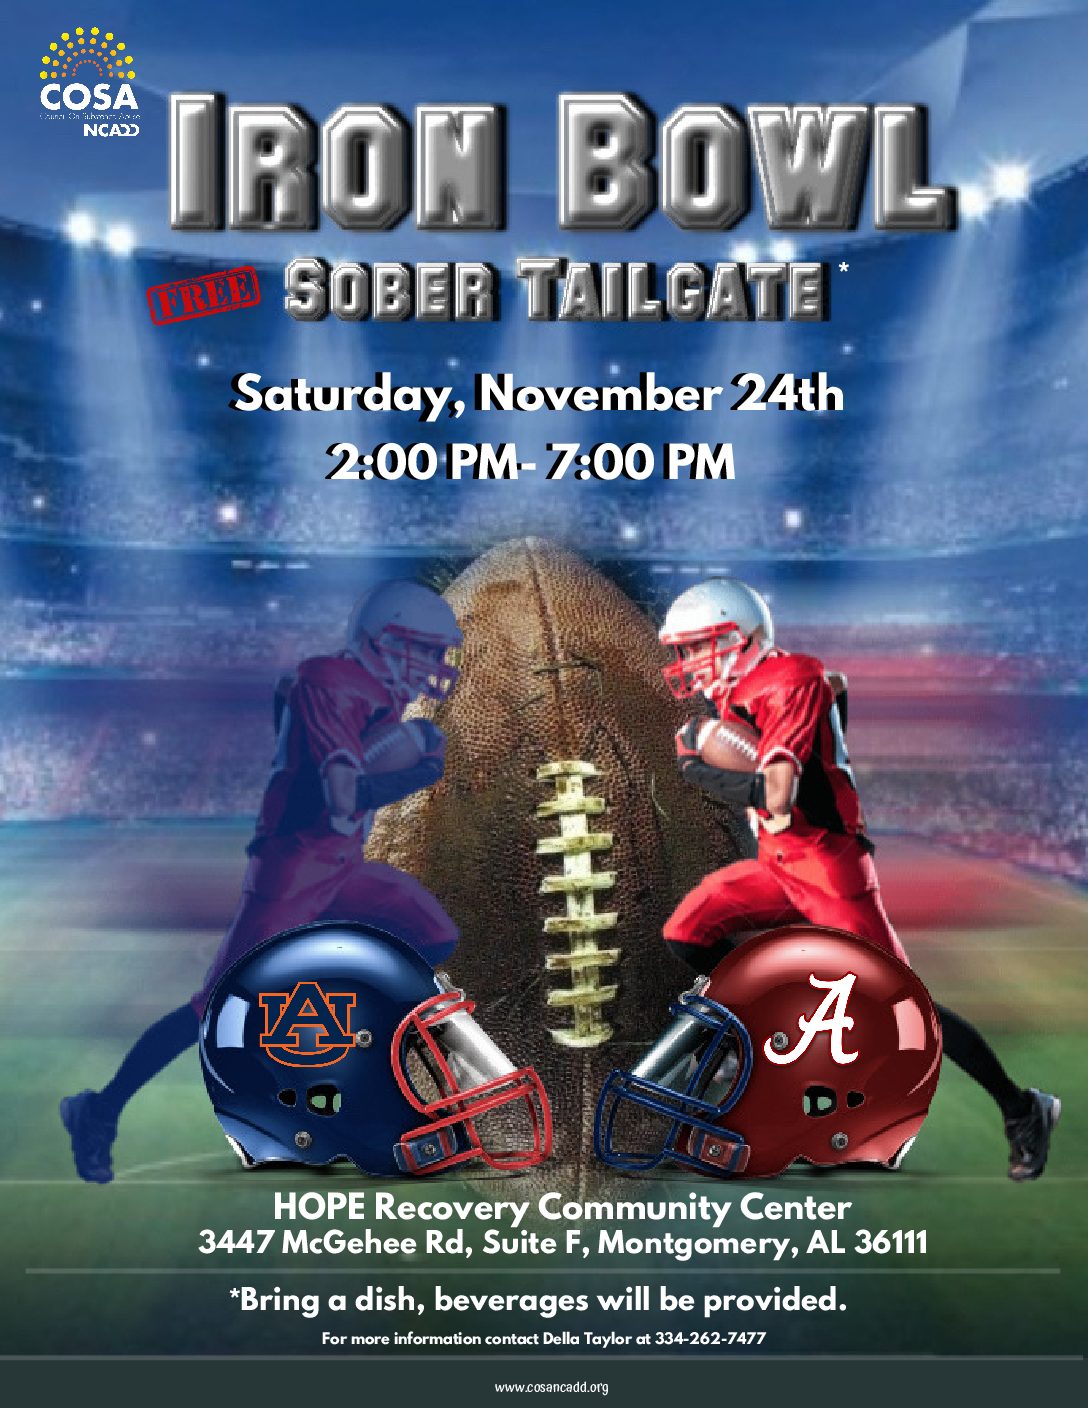 Iron Bowl Sober Tailgate Council on Substance AbuseNCADD